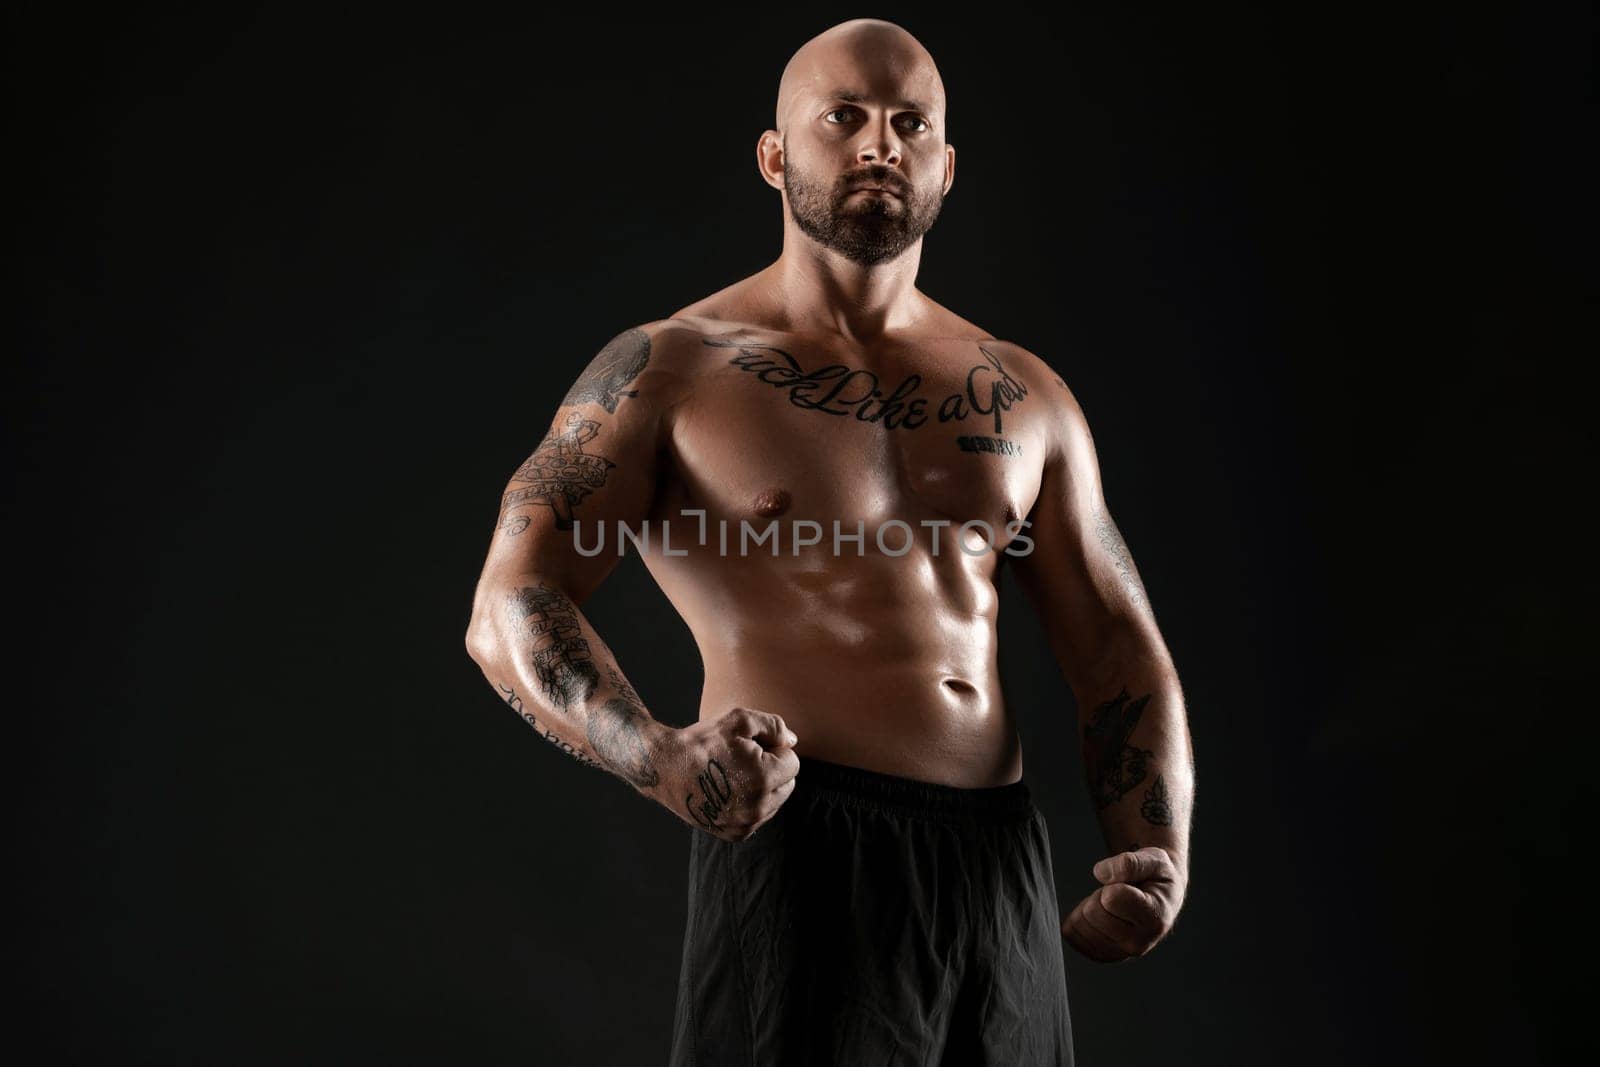 Handsome bald, bearded, tattooed fellow in black shorts is demonstating his muscles posing against a black background and looking at the camera. Chic muscular body, fitness, gym, healthy lifestyle concept. Close-up portrait.